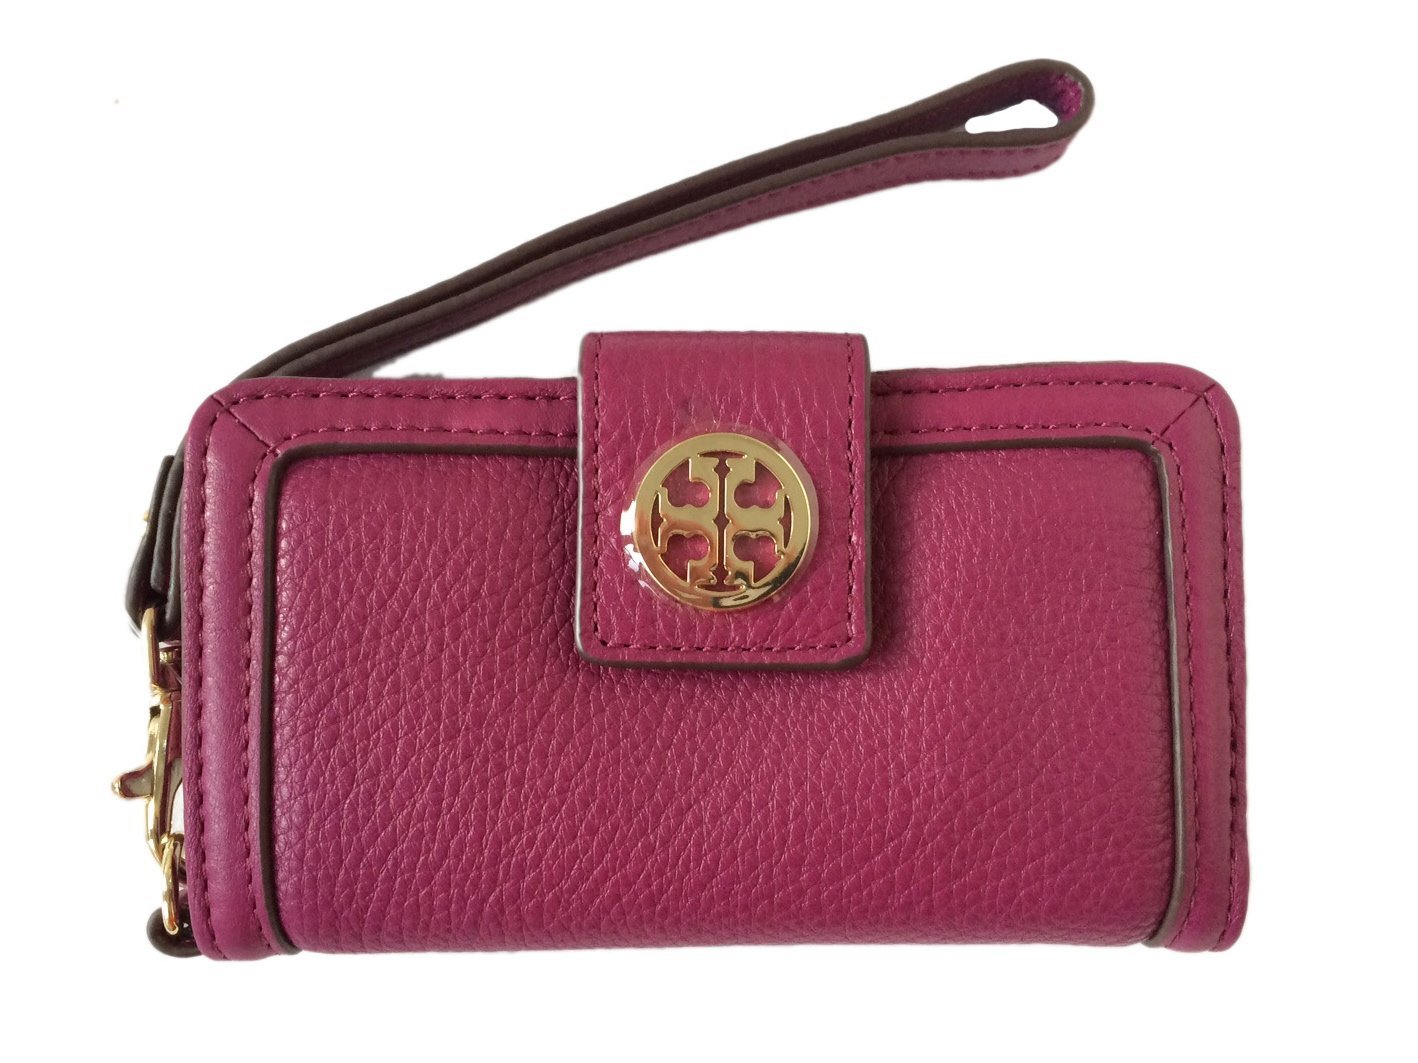 Primary image for Tory Burch Amanda Smart Phone Wallet Wristlet in Fuchsia Leather (FOR iPhone 4)